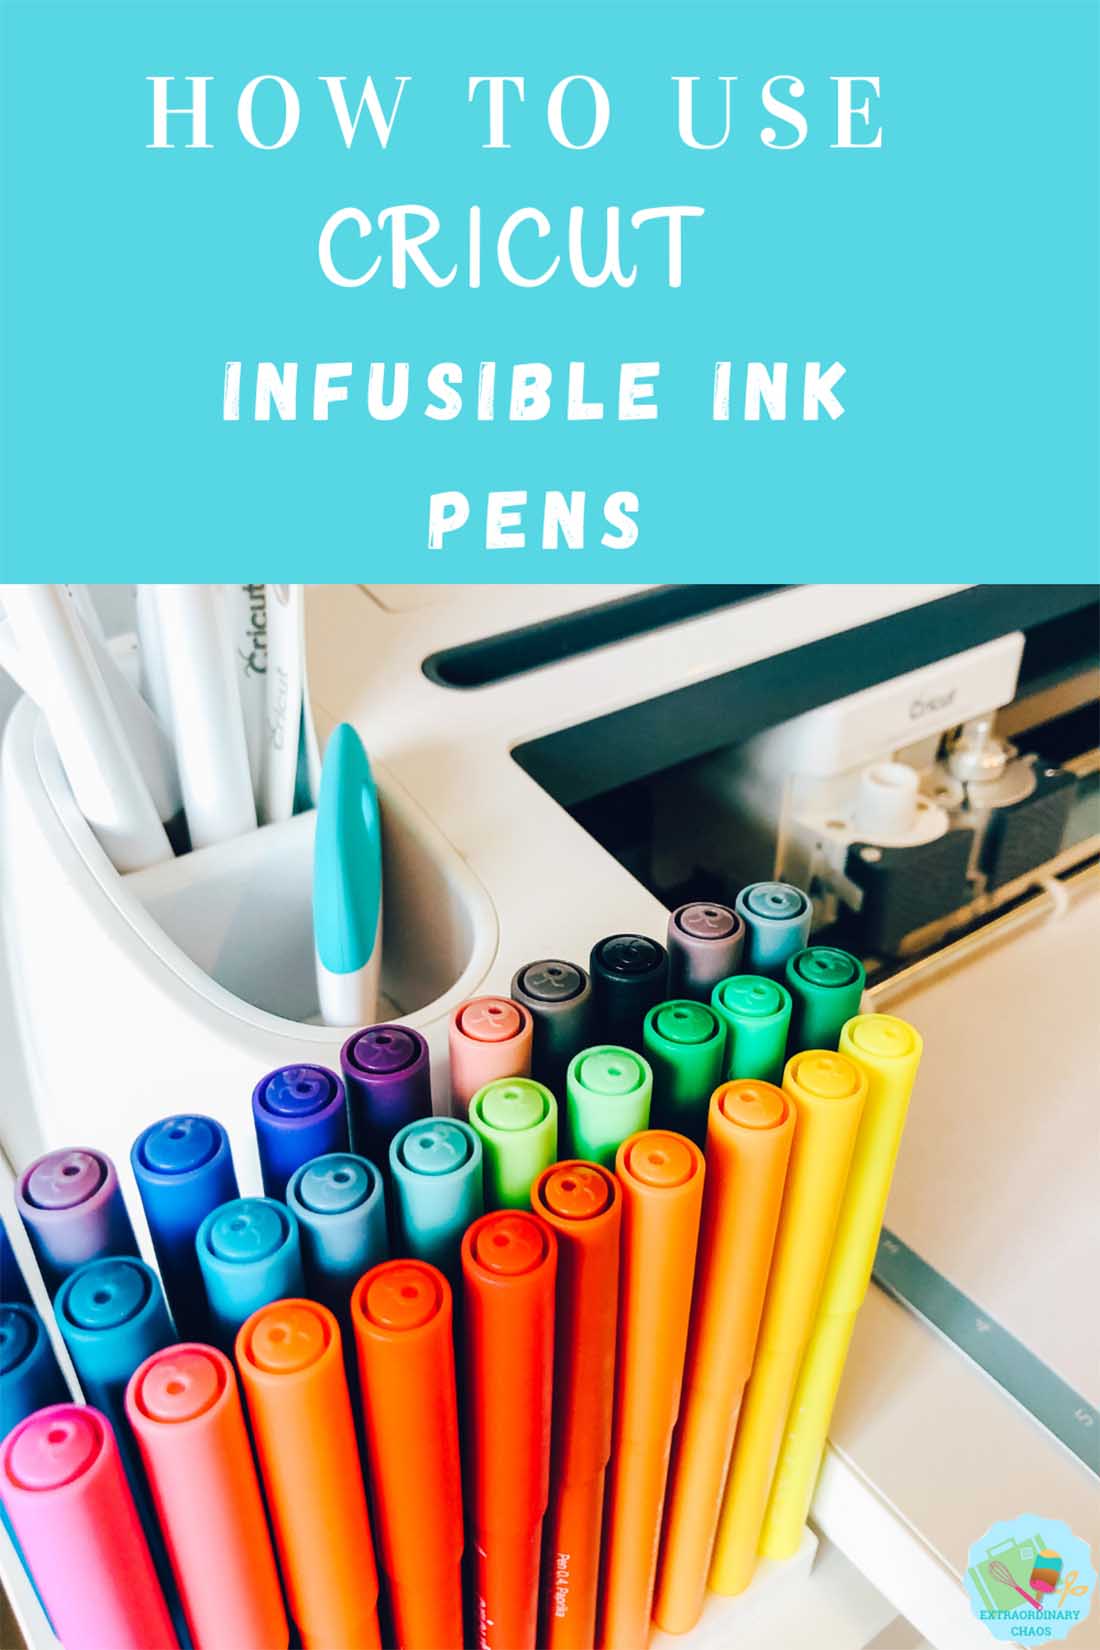 How to use Cricut Infusible Ink Pens a step by step tutorial